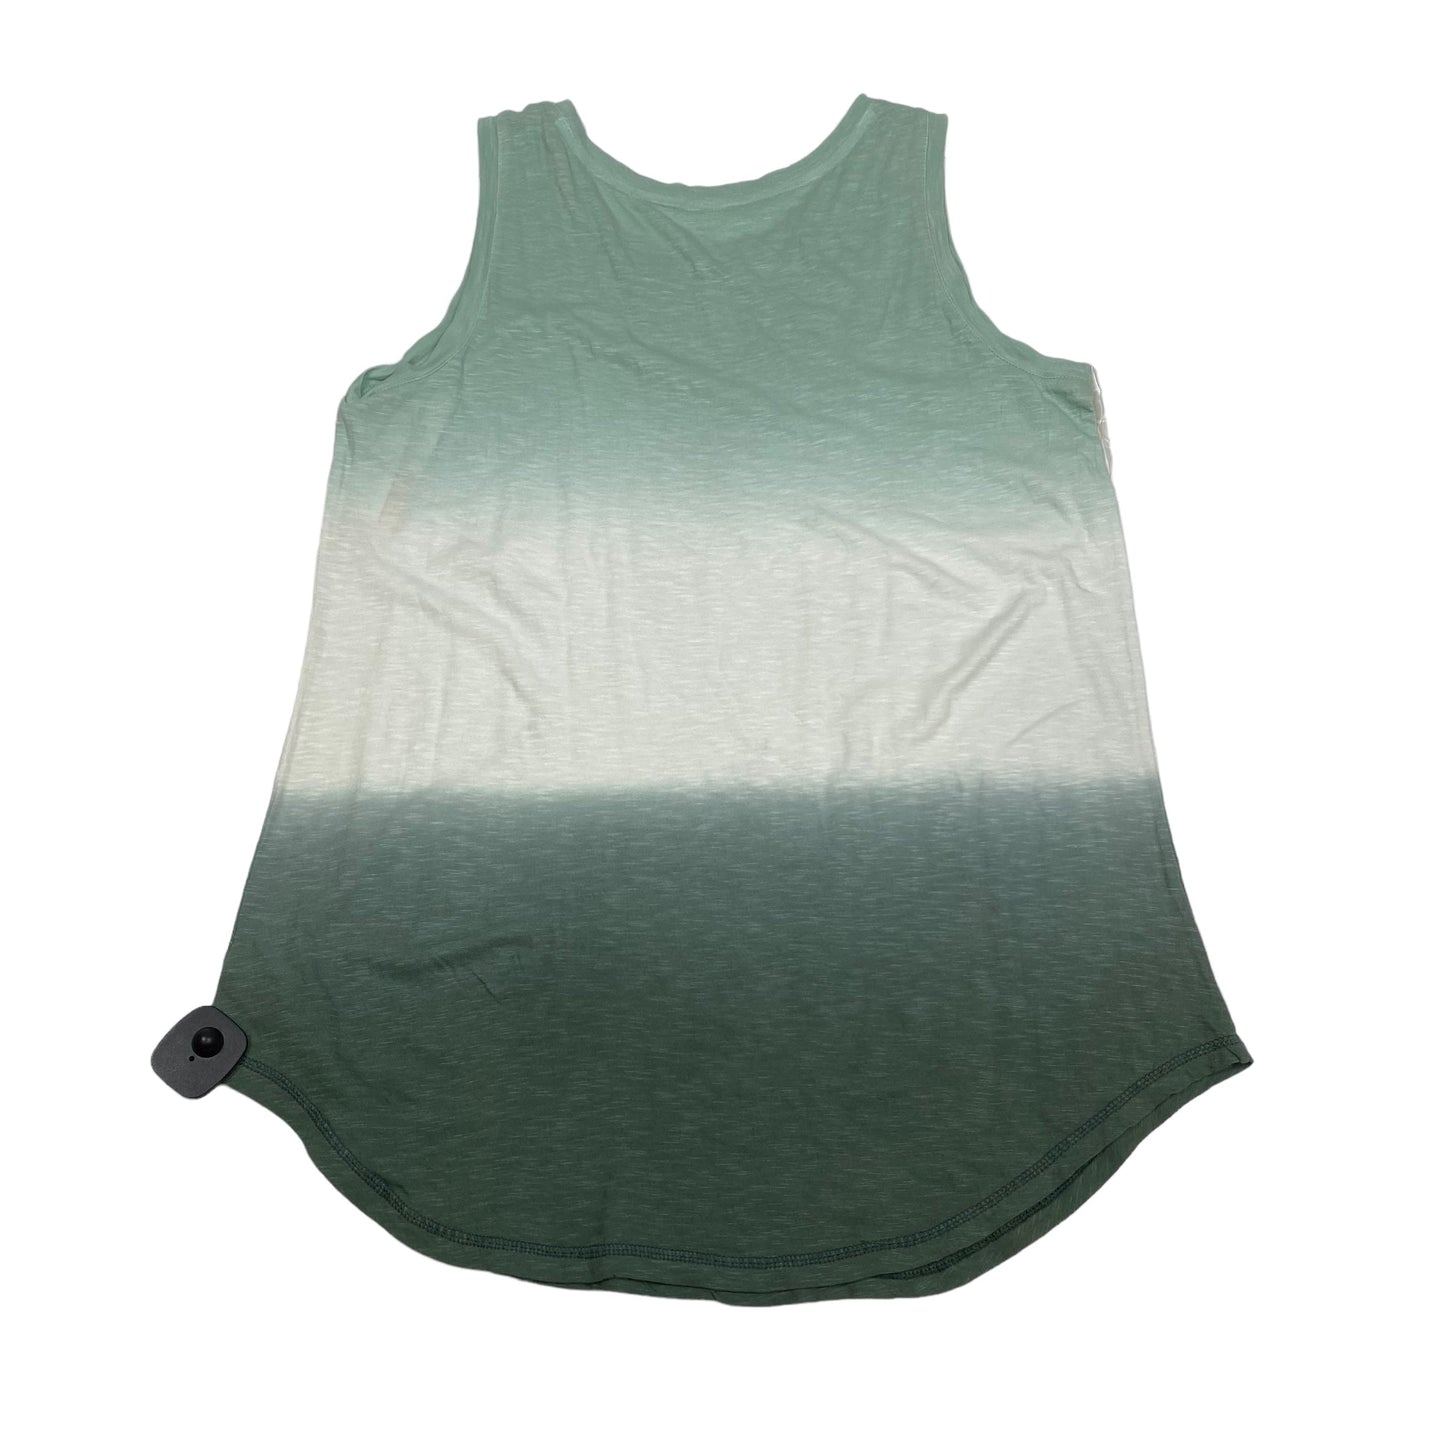 Green Top Sleeveless New Directions, Size Xl